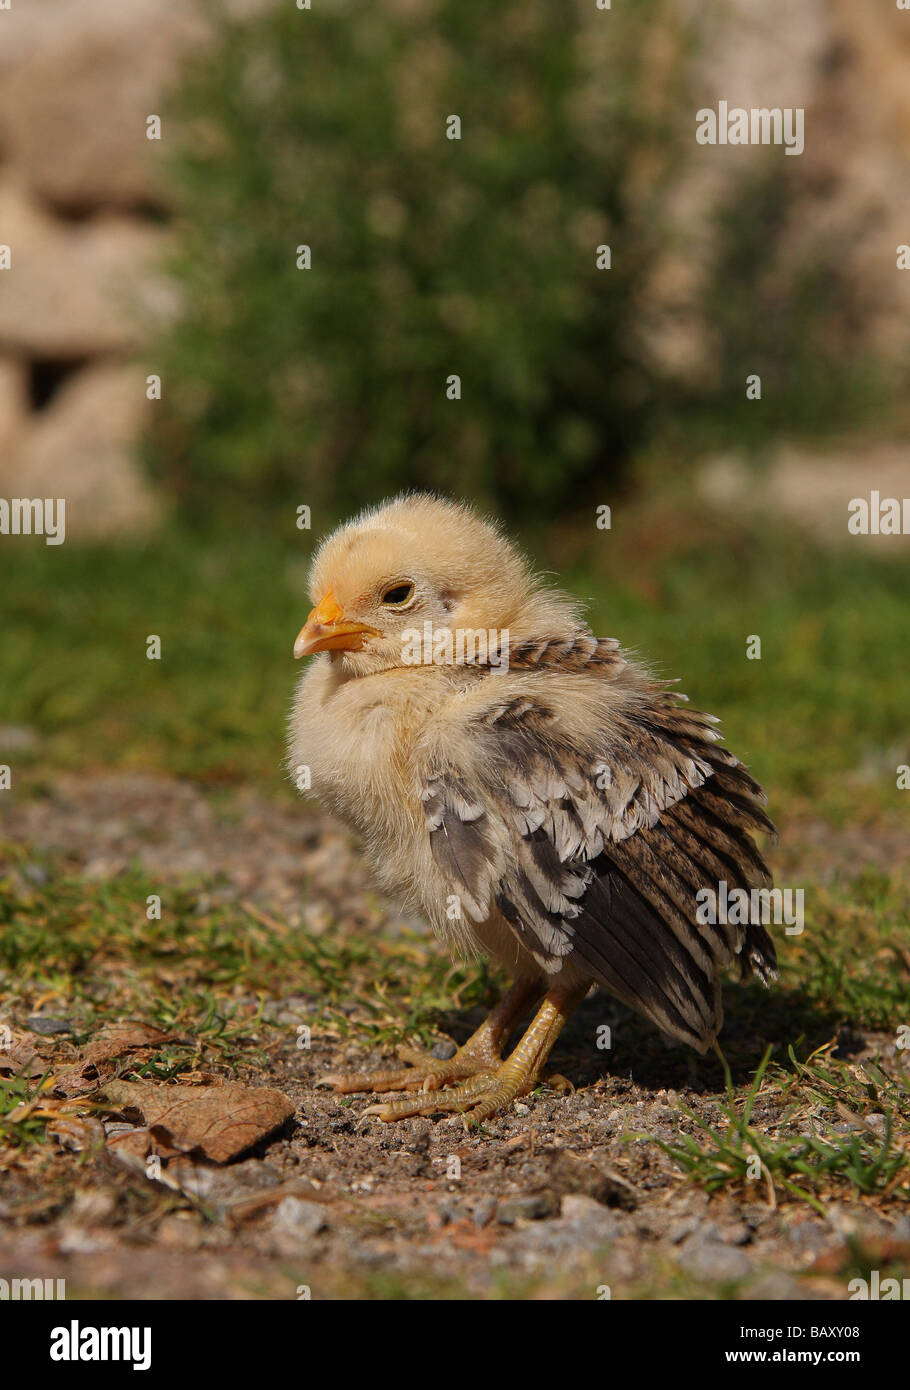 A sick young Bantam chick with its wings drooping Stock Photo